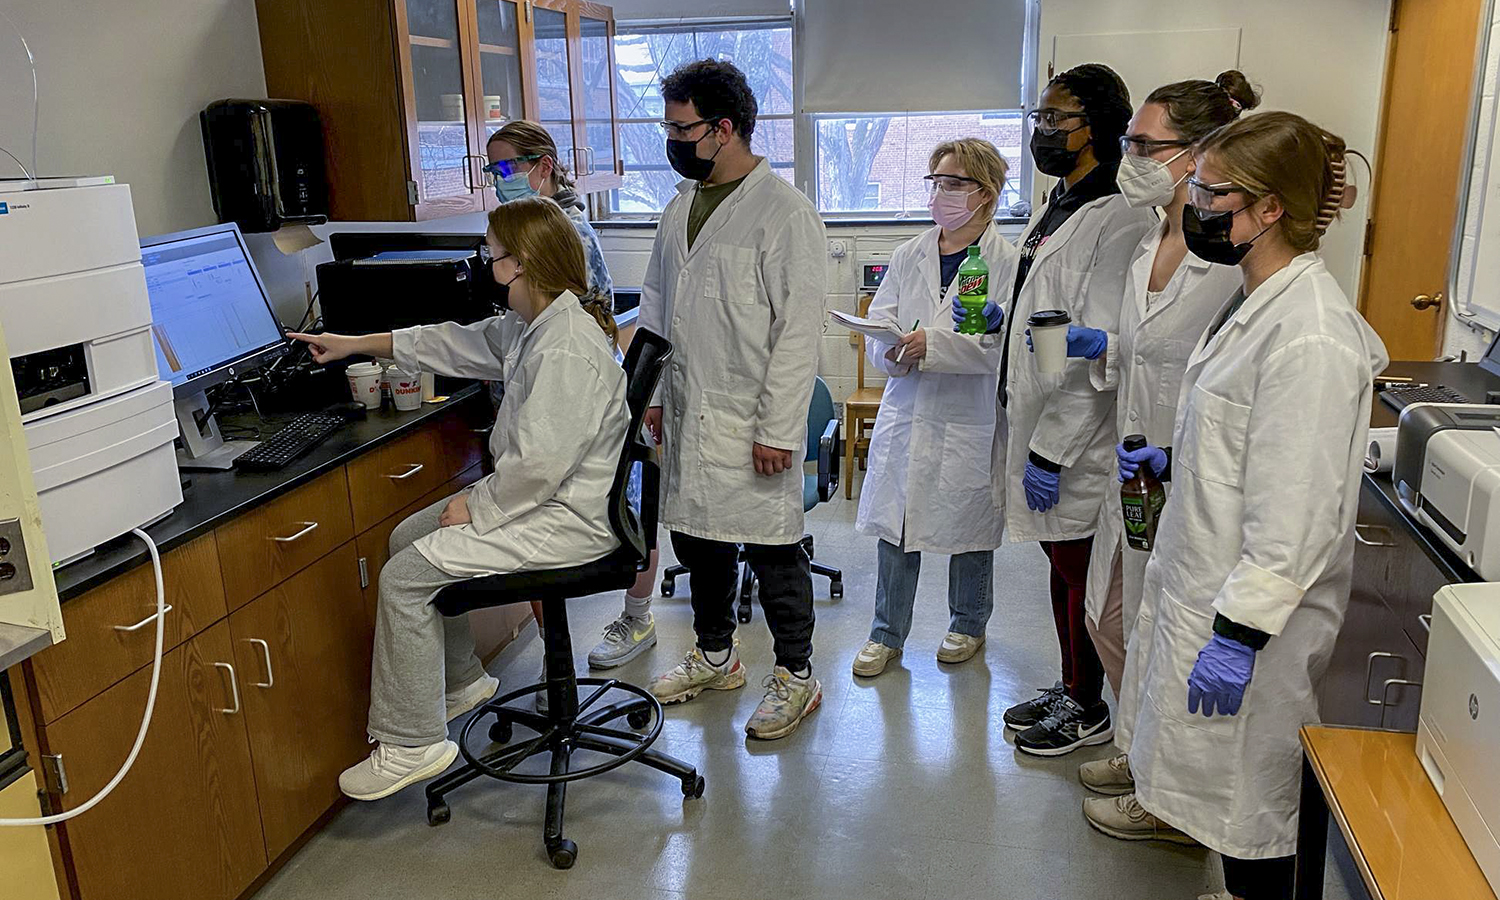 Under the guidance of Professor of Chemistry Walter Bowyer and as part of a “Quantitative Analysis” class, students learn to operate the newly purchased High Pressure Liquid Chromatograph.